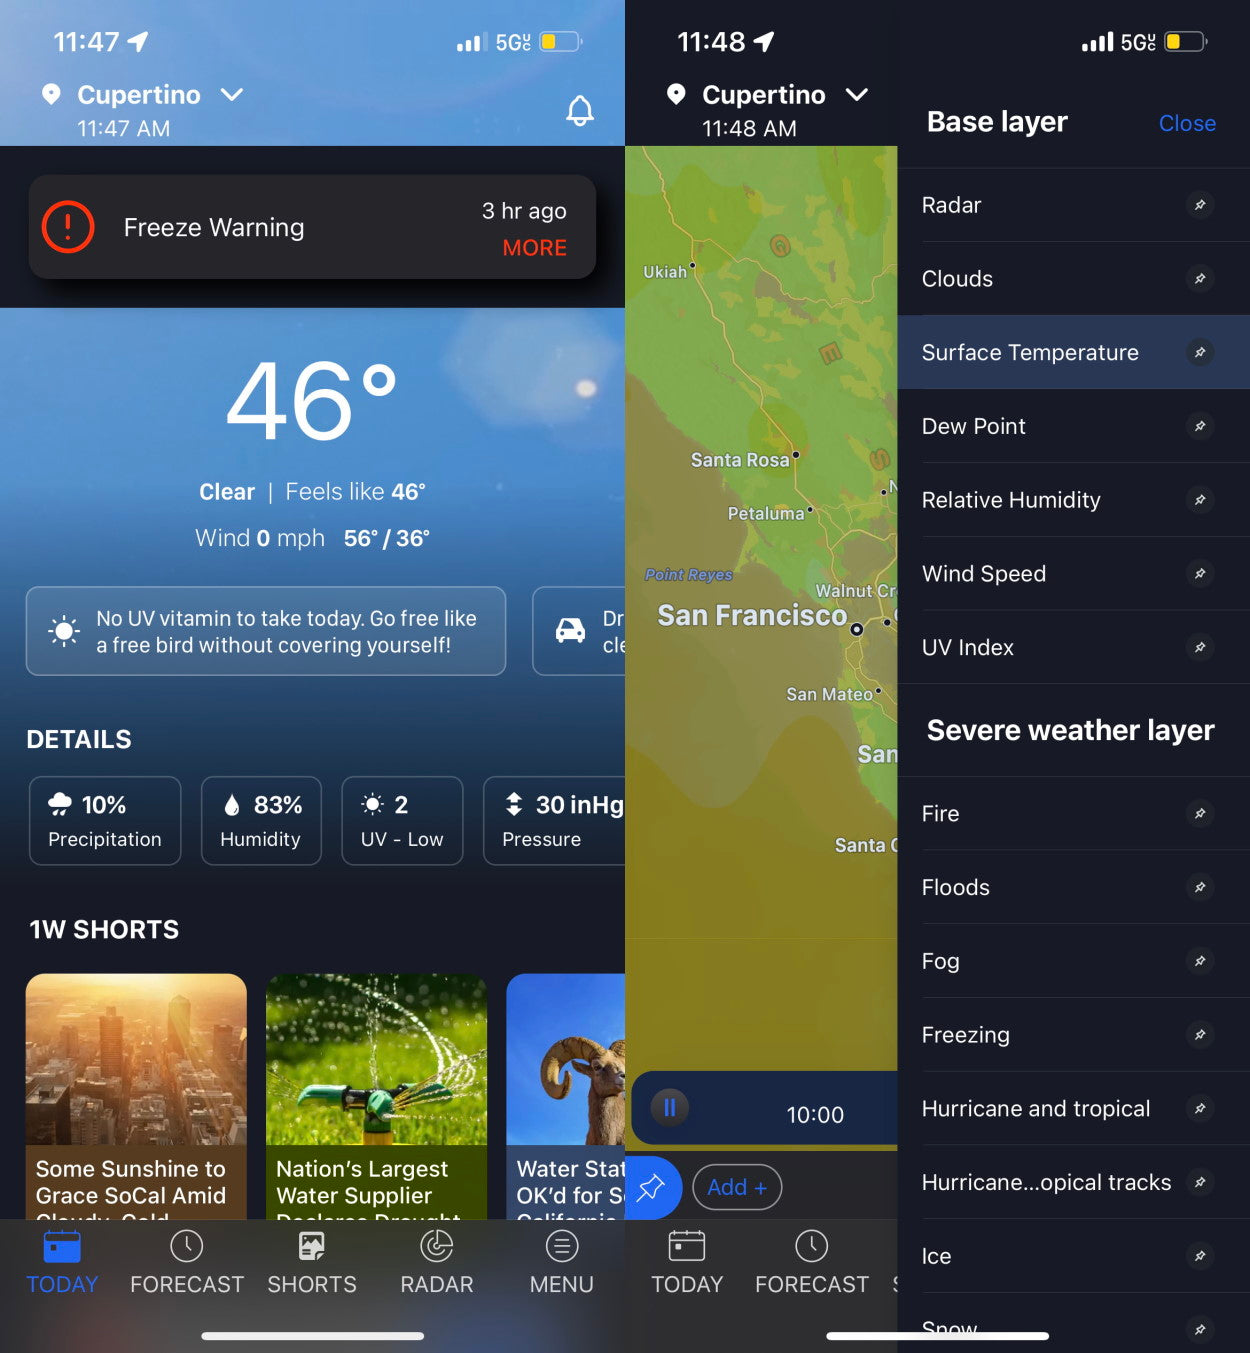 1weather App screen shots on Android